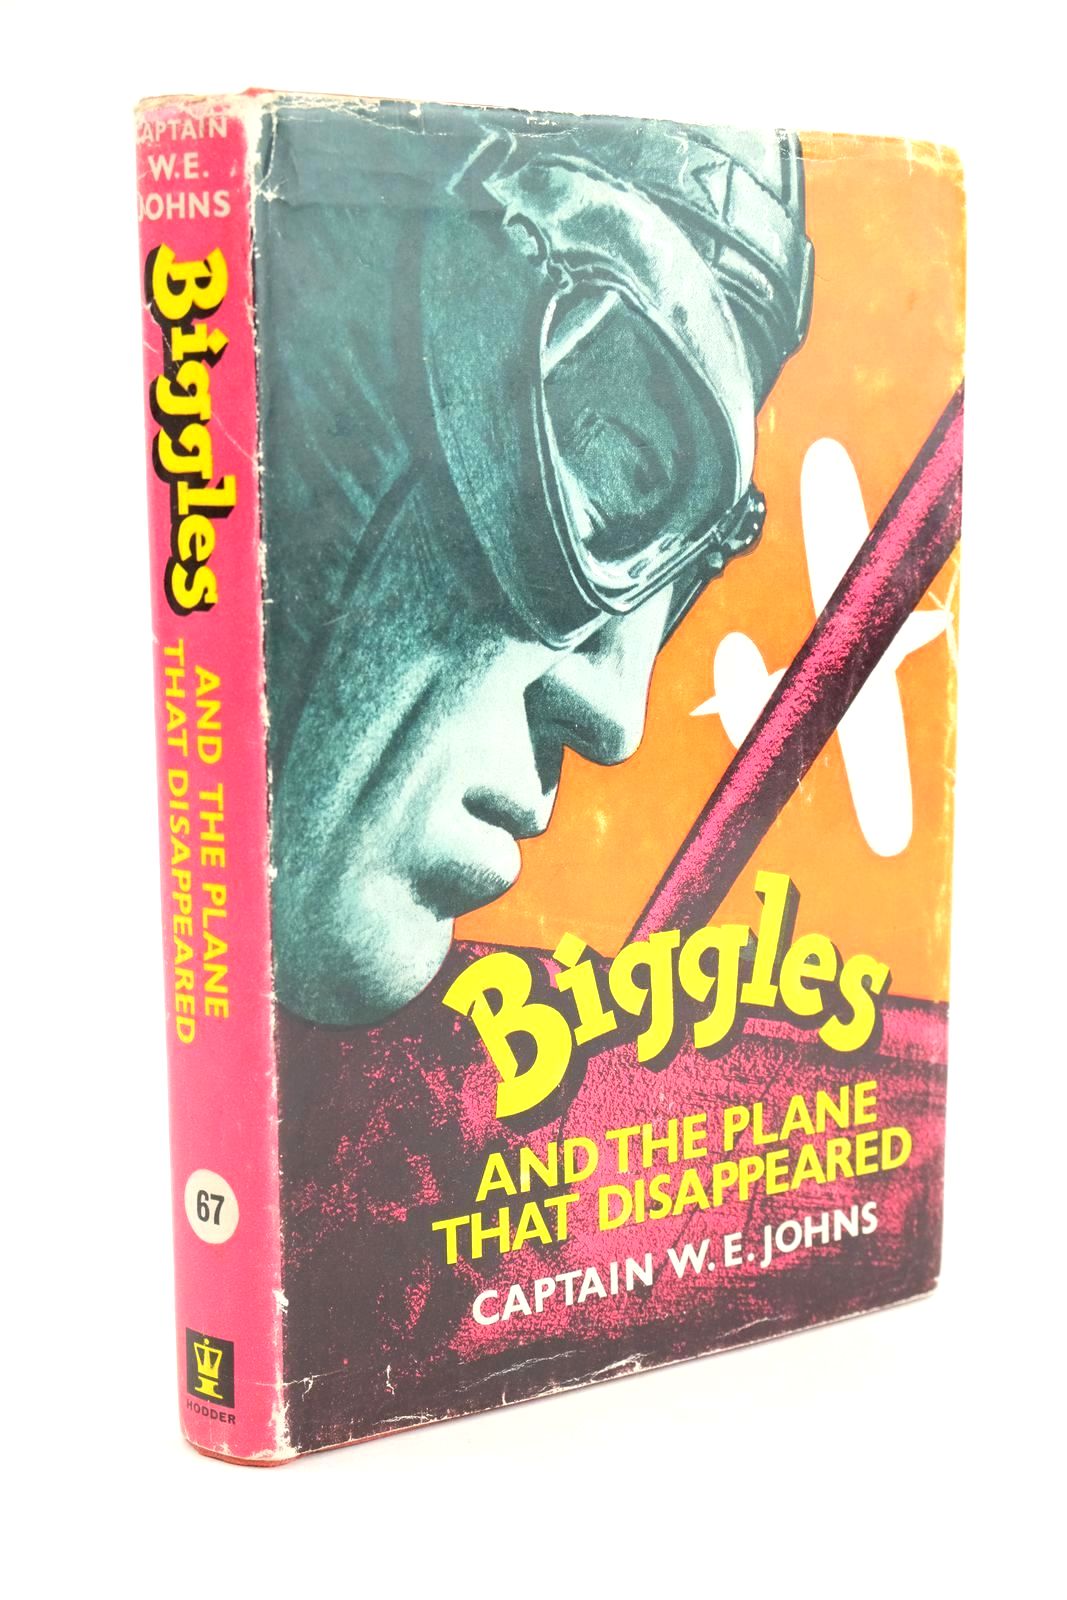 Photo of BIGGLES AND THE PLANE THAT DISAPPEARED written by Johns, W.E. illustrated by Stead, published by Hodder &amp; Stoughton (STOCK CODE: 1324418)  for sale by Stella & Rose's Books